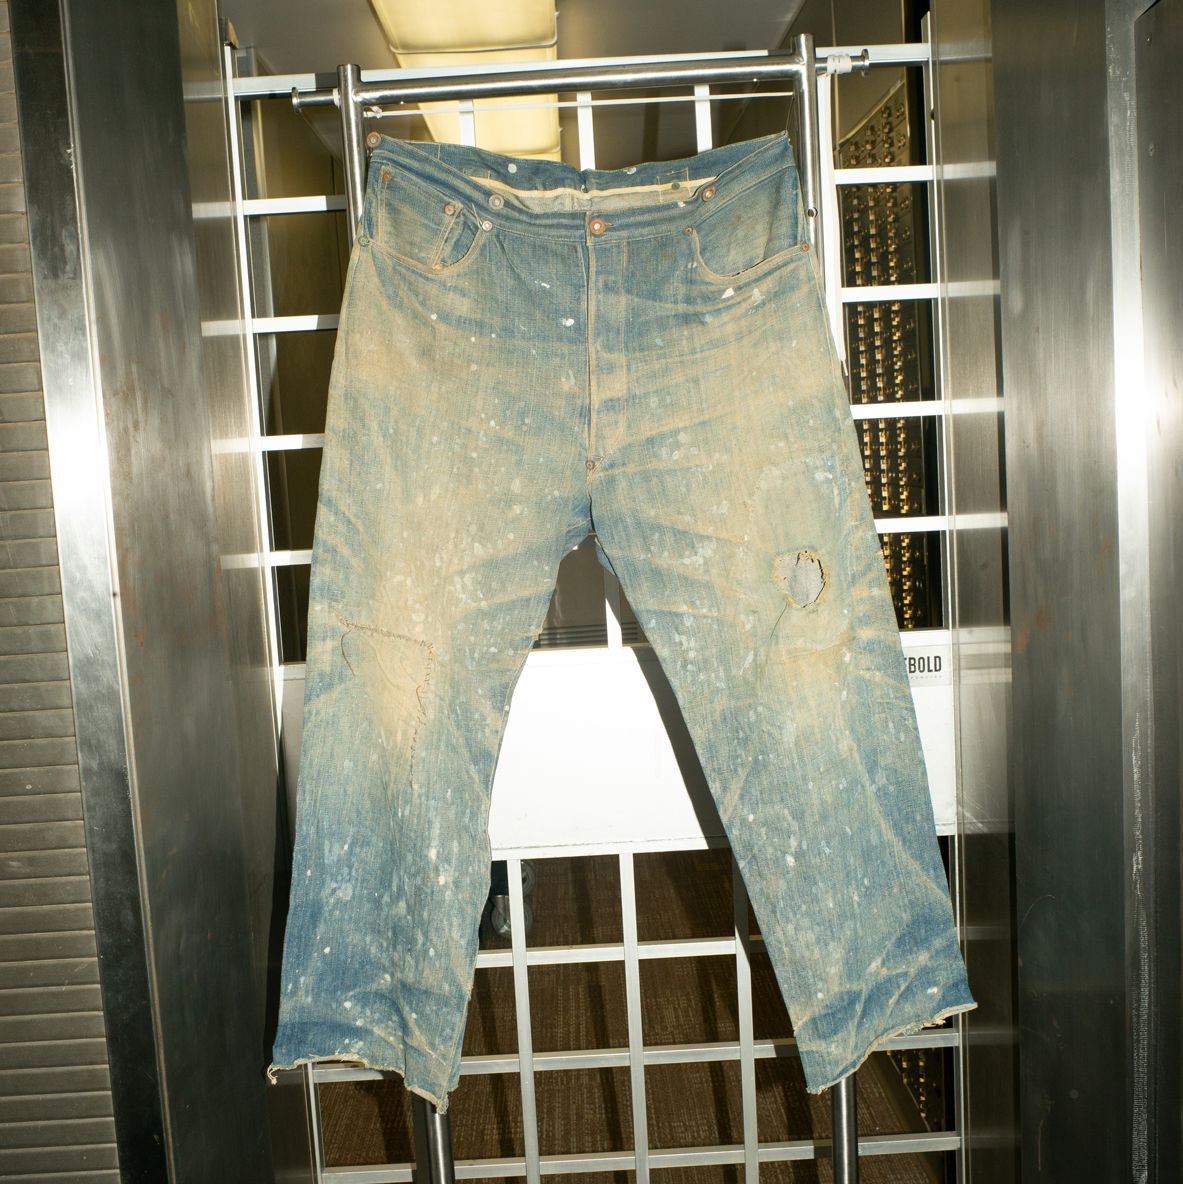 Pants and jeans Levi's® 80S Mom Jean Boo Boo Med Indigo - Worn In